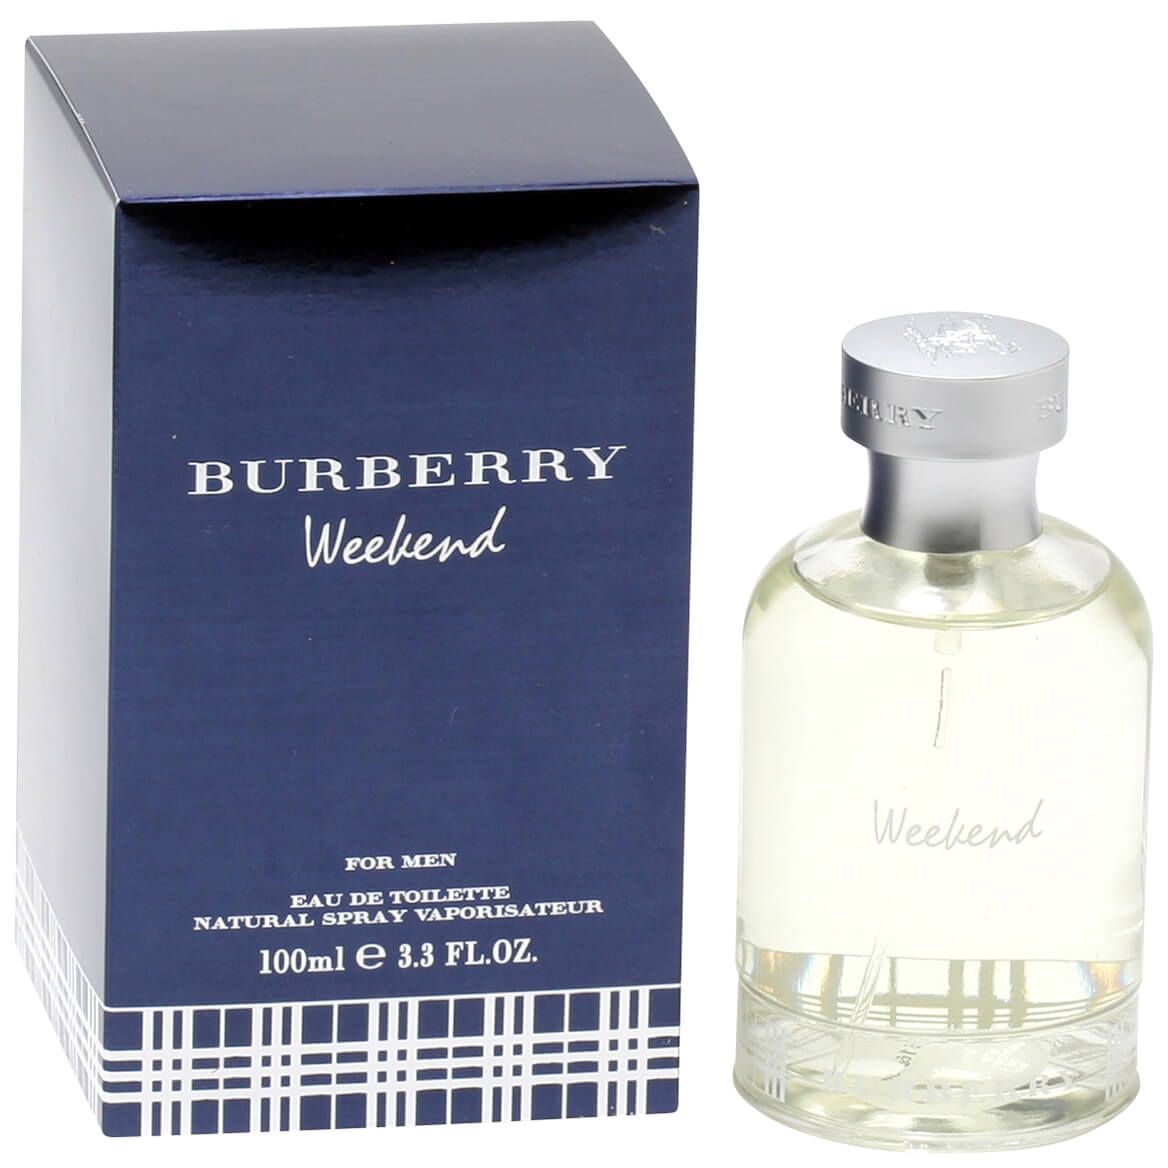 Burberry Weekend by Burberry for Men EDT, 1.7 oz. + '-' + 373146